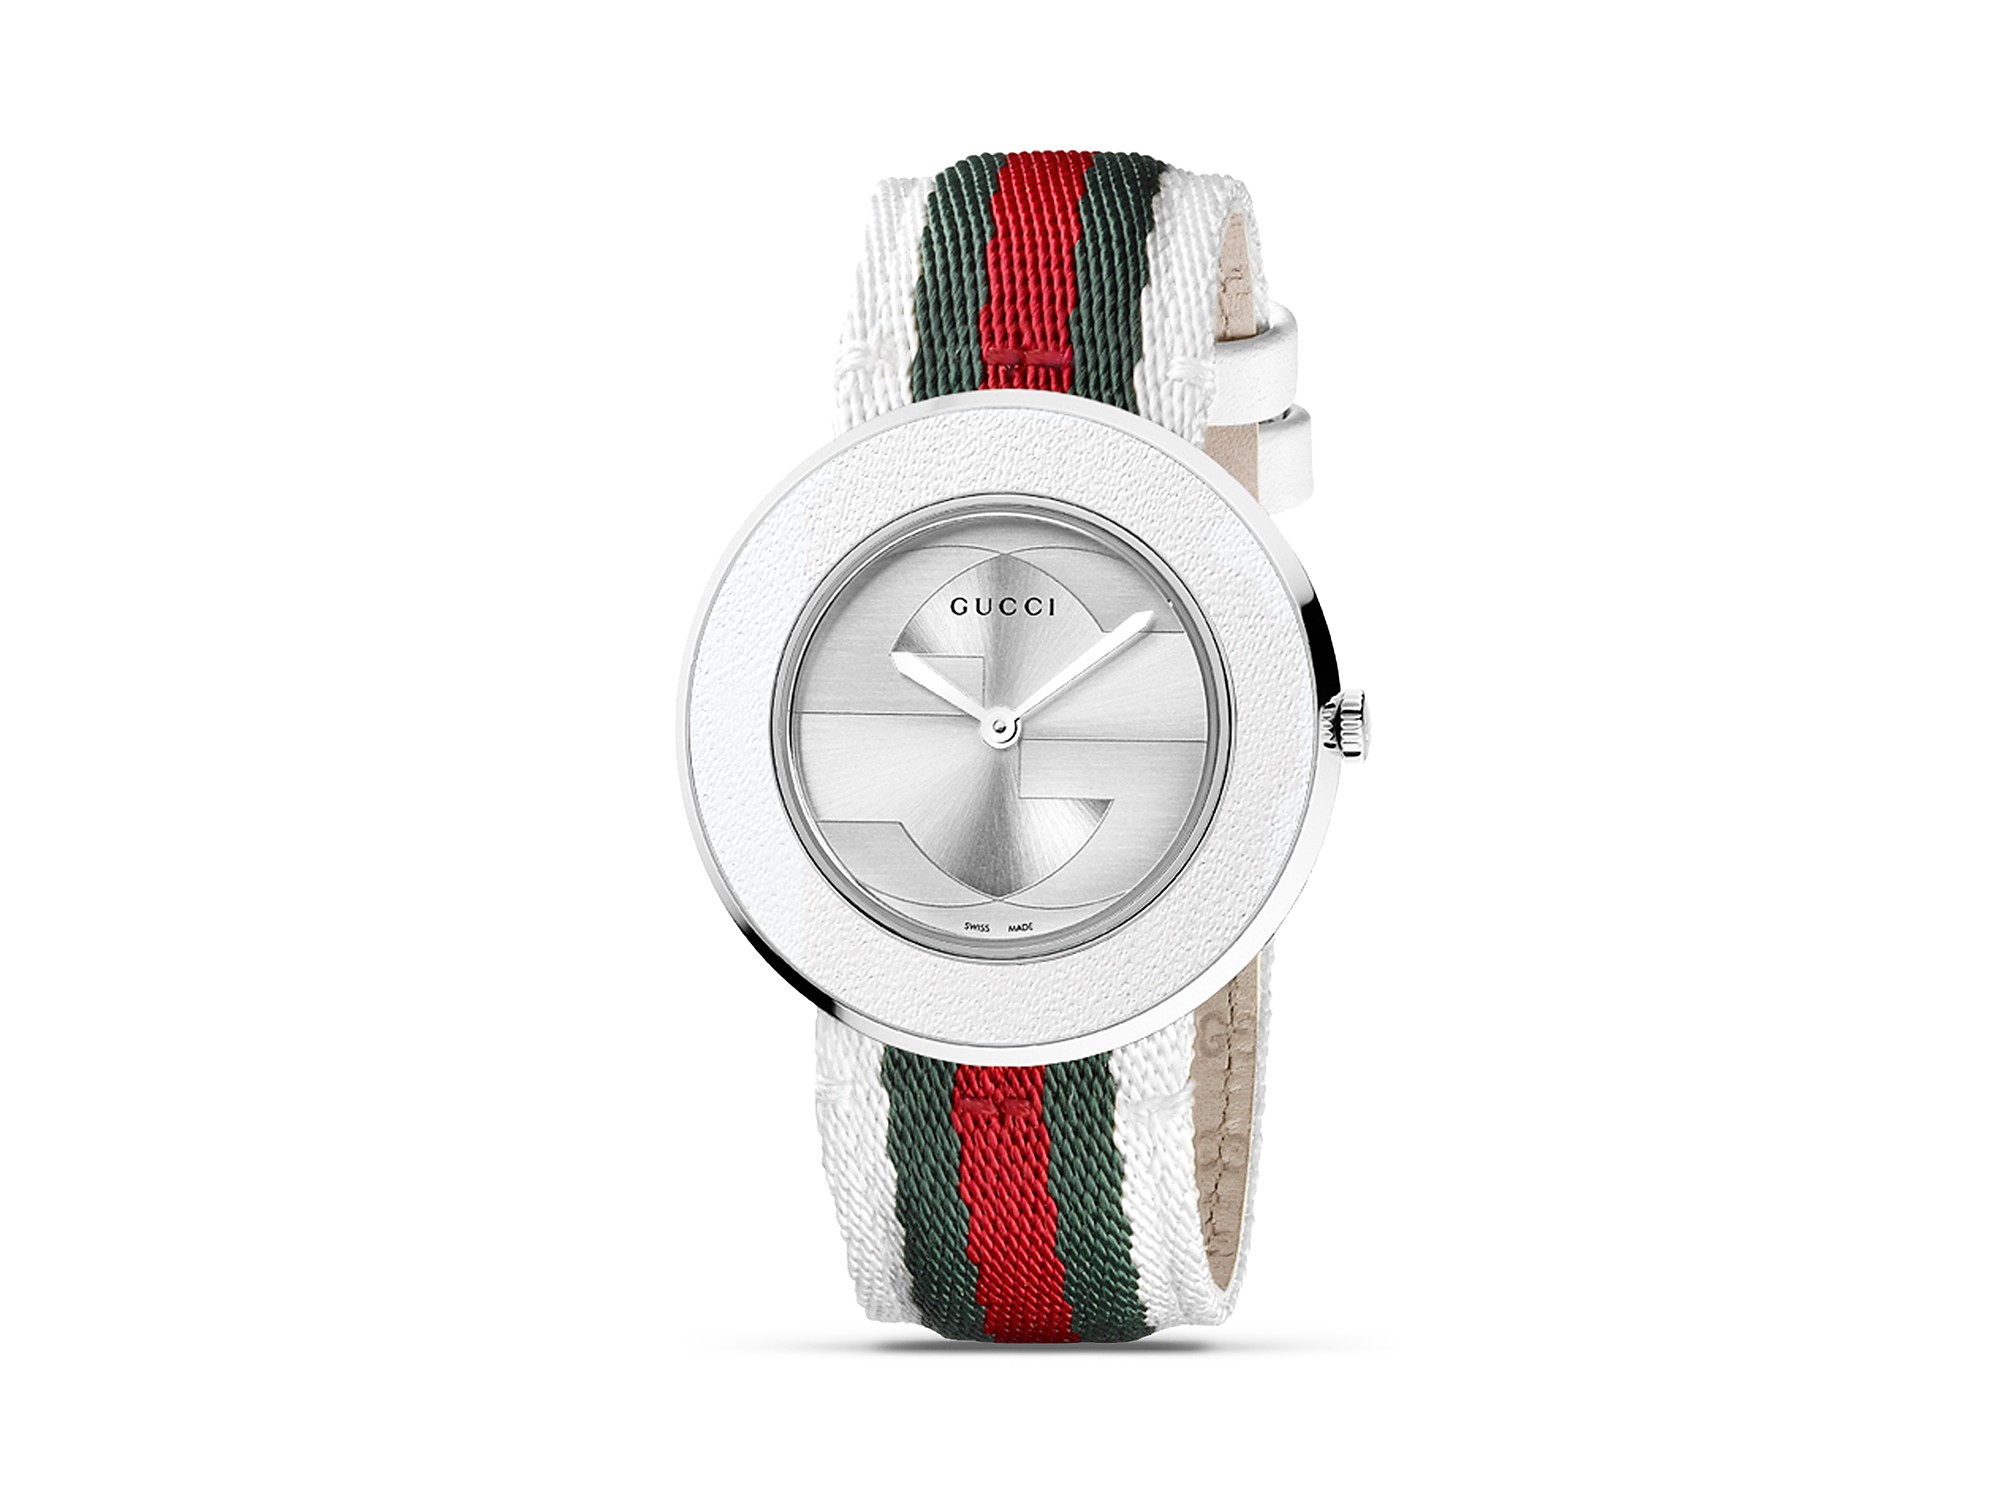 Lyst - Gucci U-play Stainless Steel & Nylon Watch in Red